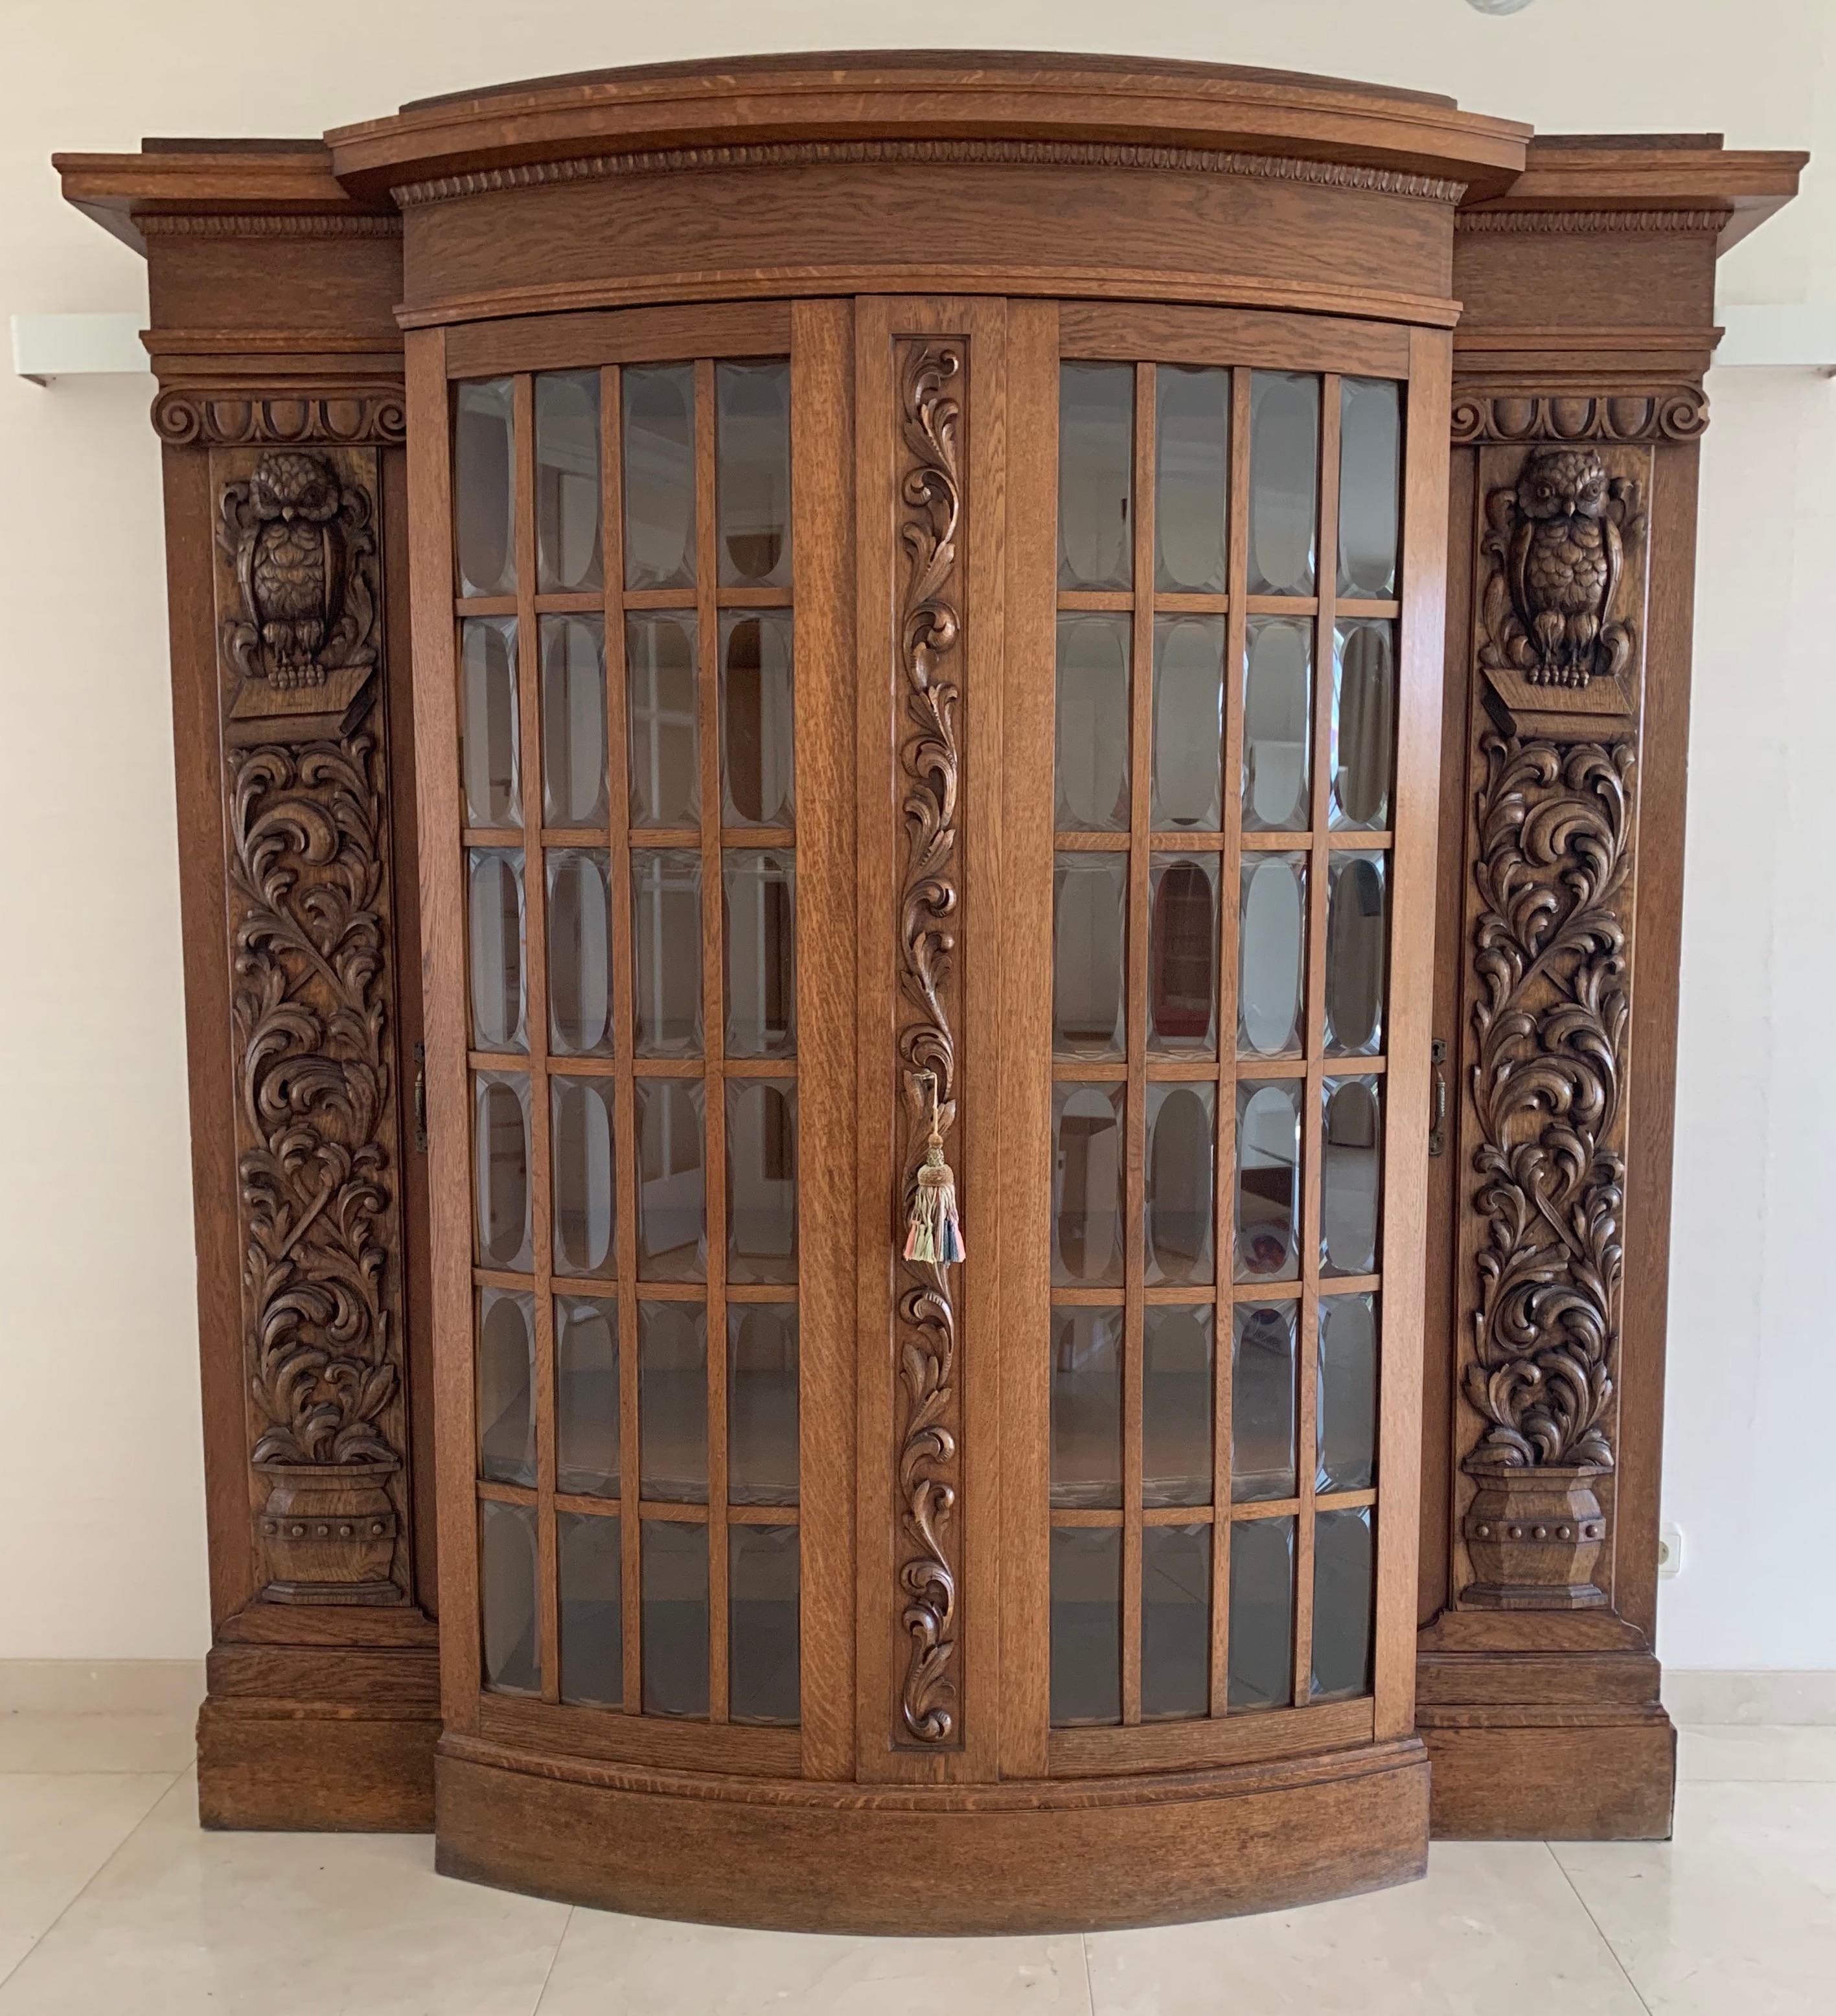 Remarkable design bookcase or cupboard with stunning owl sculptures.

This large size, grand and impressive in appearance cabinet is another great example of the workmanship of some of the better furniture makers in turn-of-the-century Europe.